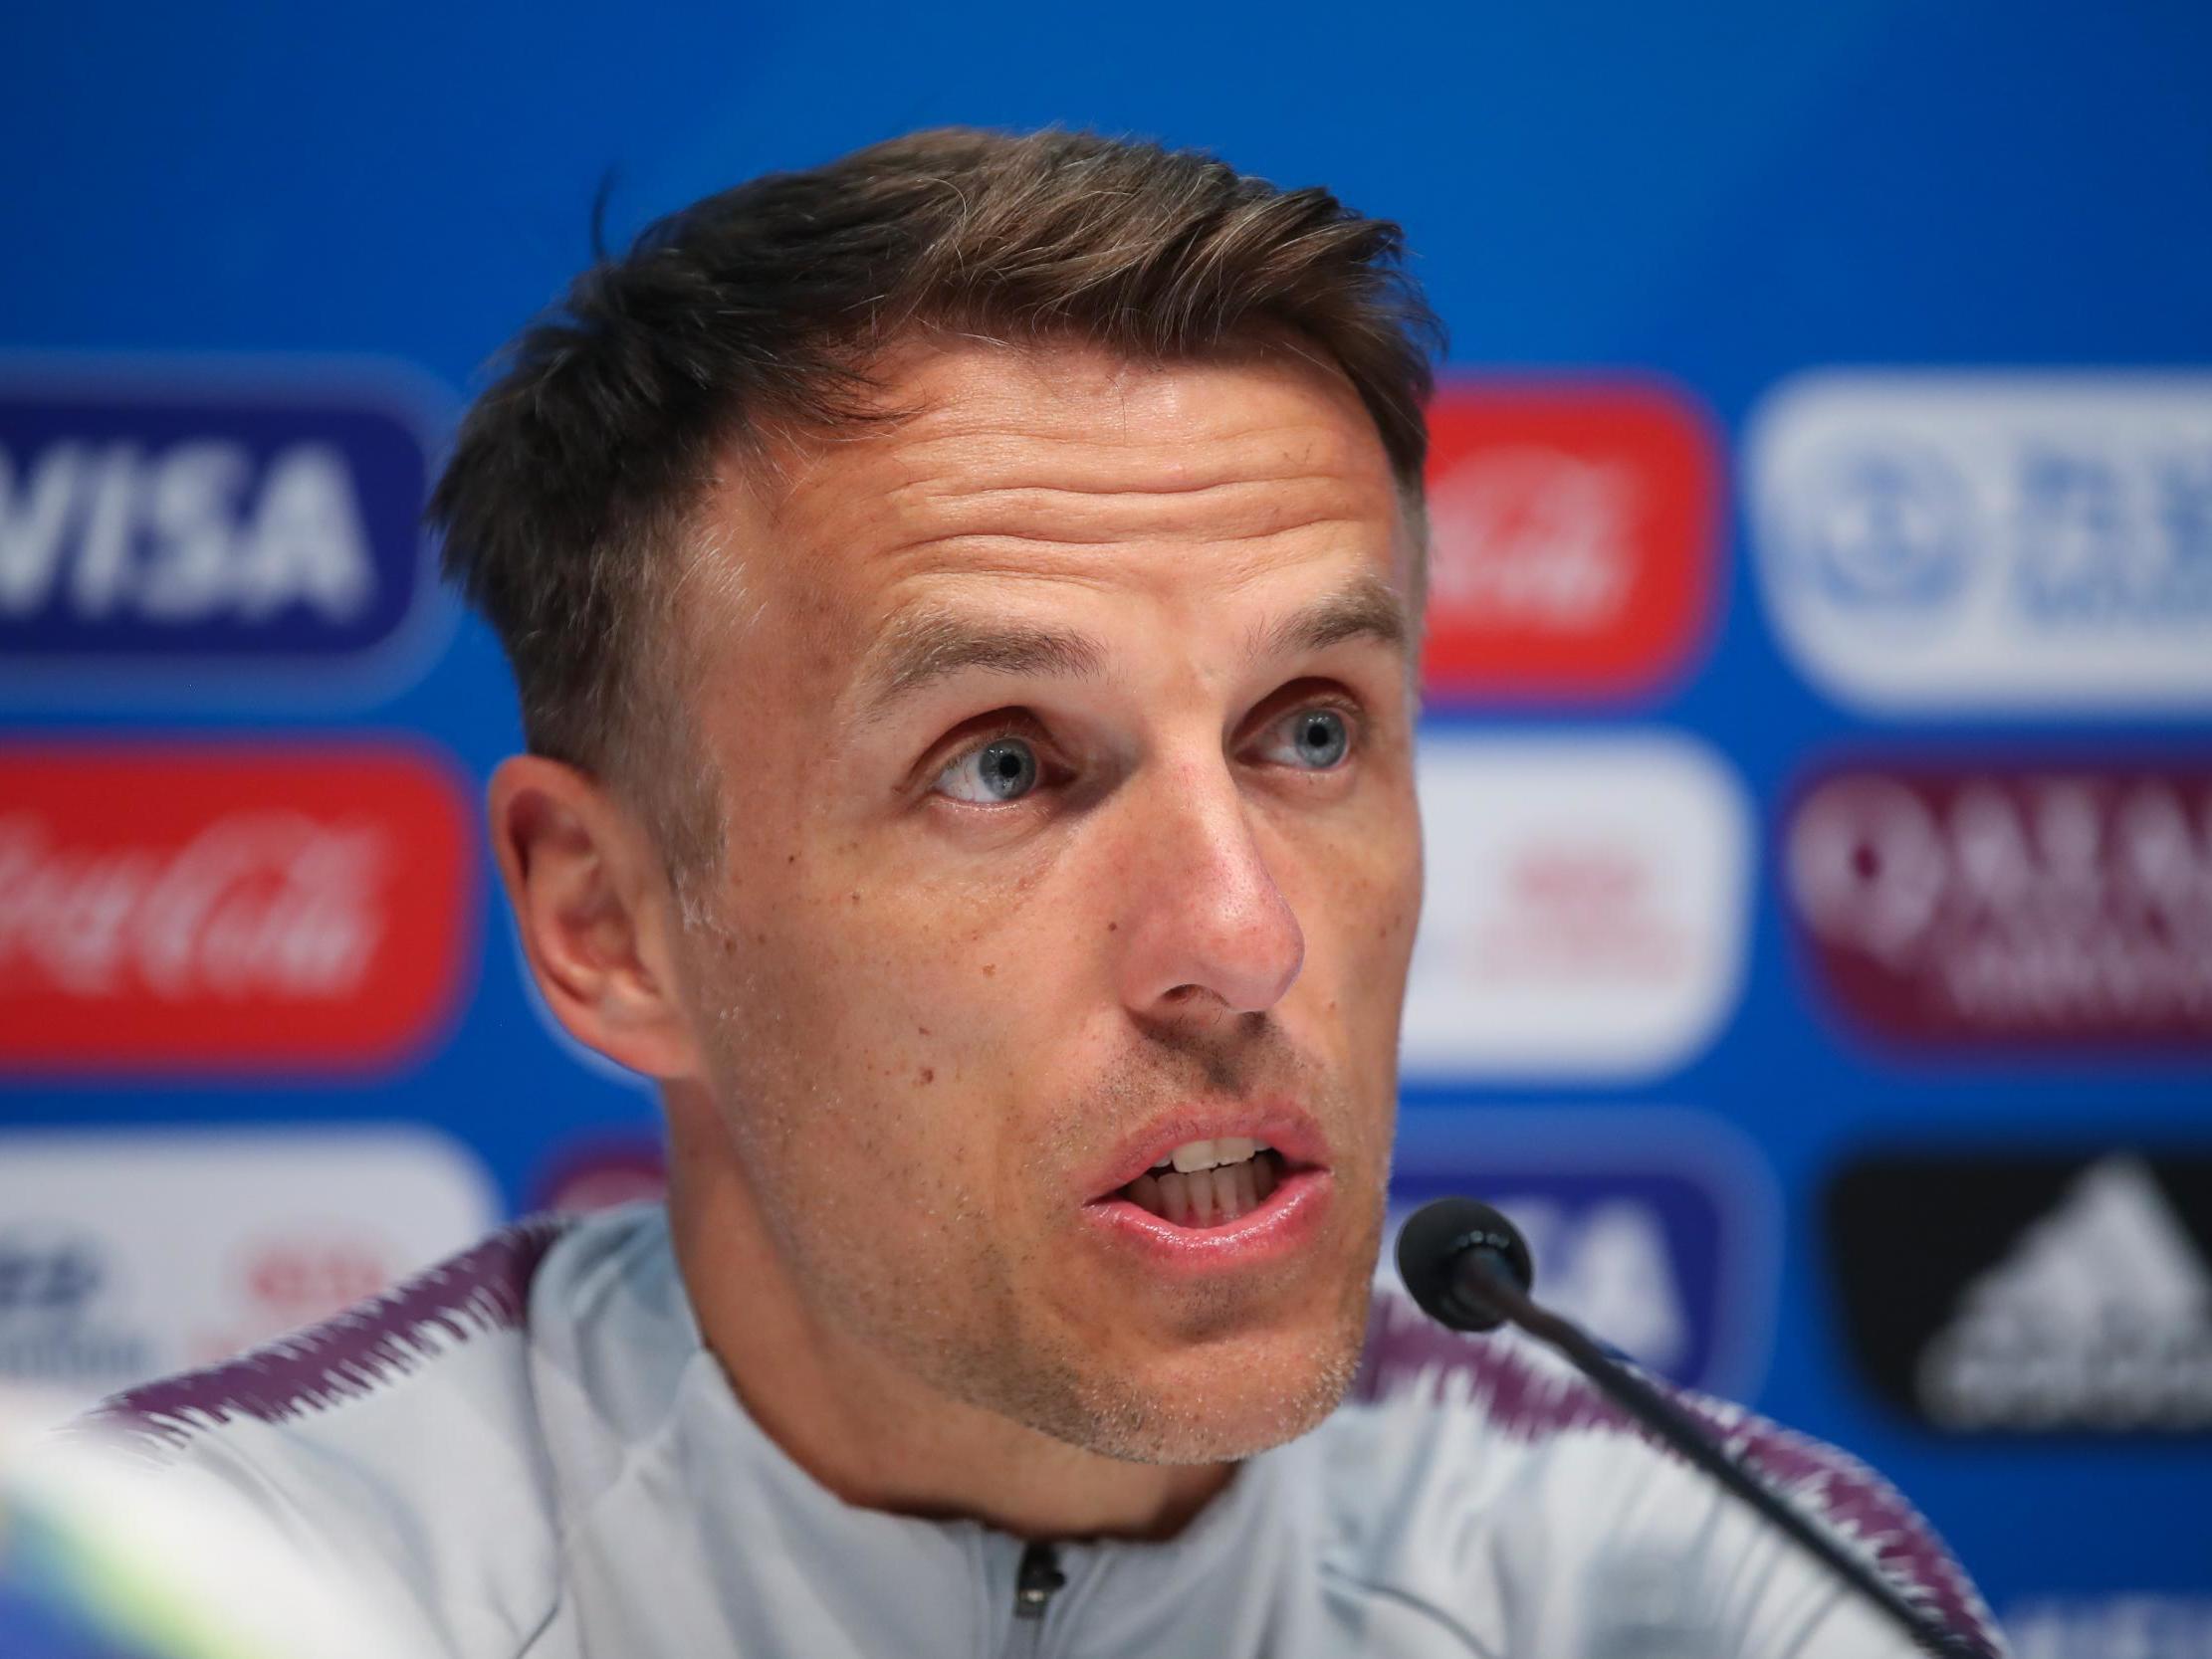 England vs Argentina, Women's World Cup 2019: Phill Neville says men's rivalry not relevant to Lionesses